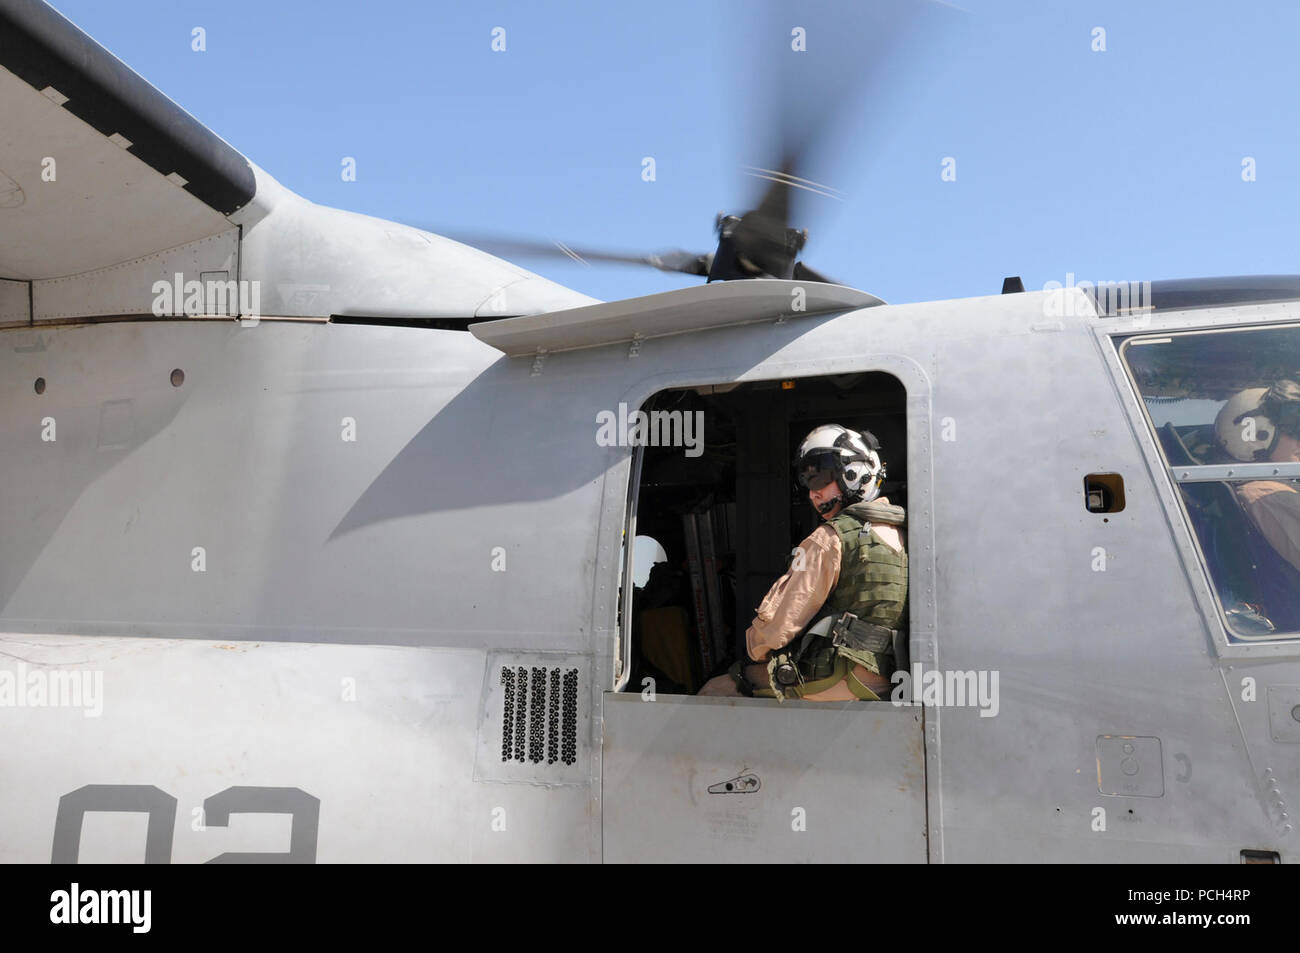 Marine Corps Staff Sgt. Jenna Kumdh, from Marine Medium Tiltrotor Squadron 162, looks out the window of an MV-22 Osprey, watching for other aircraft on the flight line at U.S. Naval Station Guantanamo Bay, Jan. 24. The aircraft, scheduled to fly to the USS Bataan with supplies for Haiti, is here in support of Operation Unified Response. Stock Photo